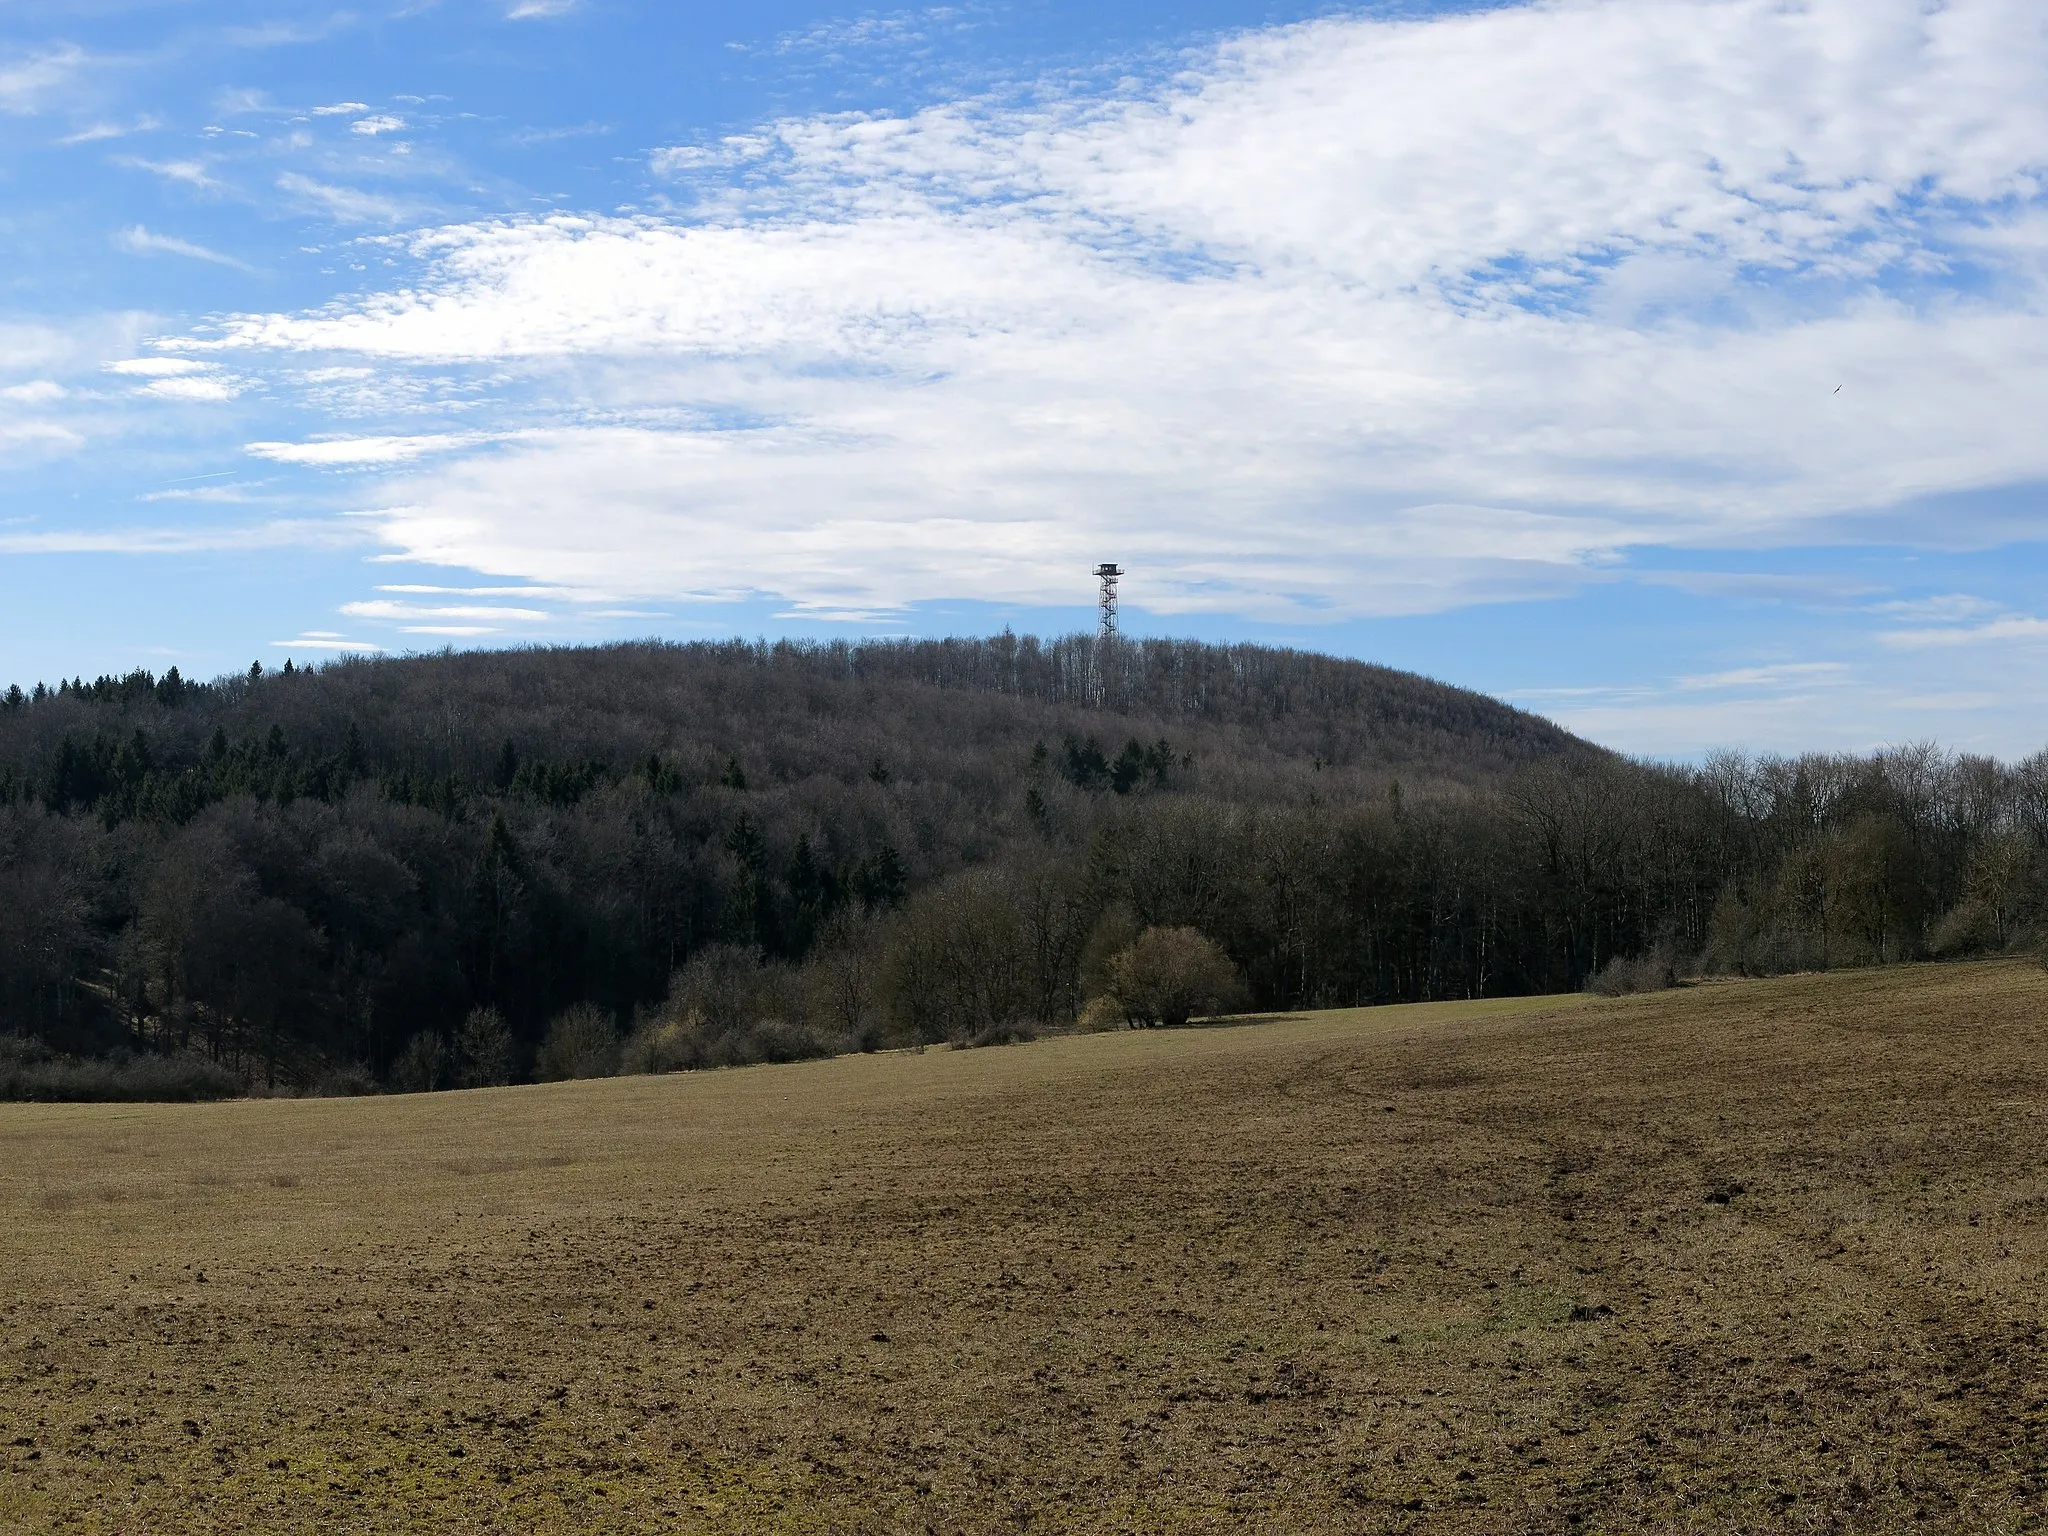 Photo showing: The Mountain Hursch on the Swabian Jura, seen from the east